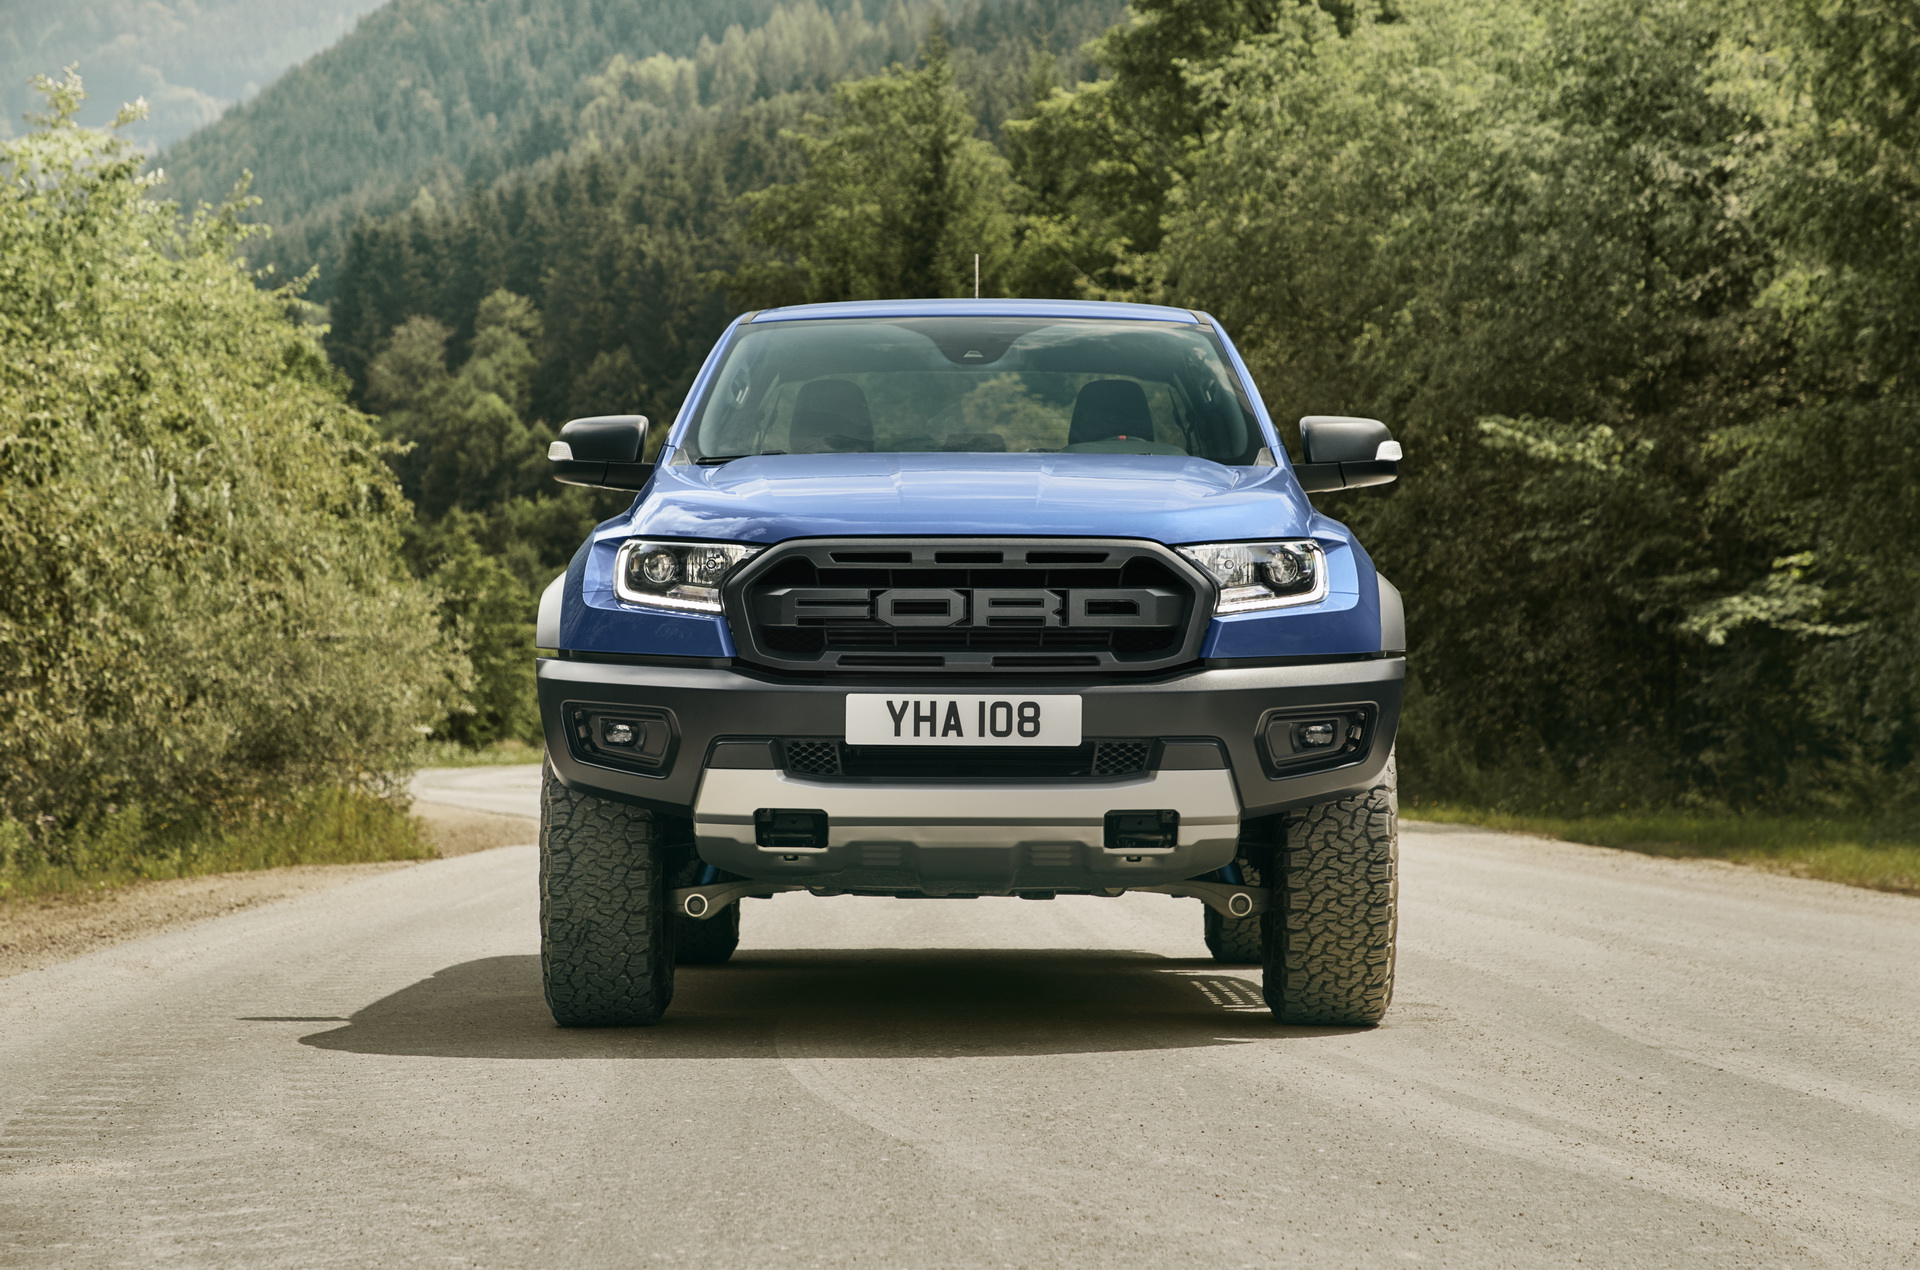 Report: Ford Ranger Raptor Gets a 325-HP V6, Fox Shocks; May Be US